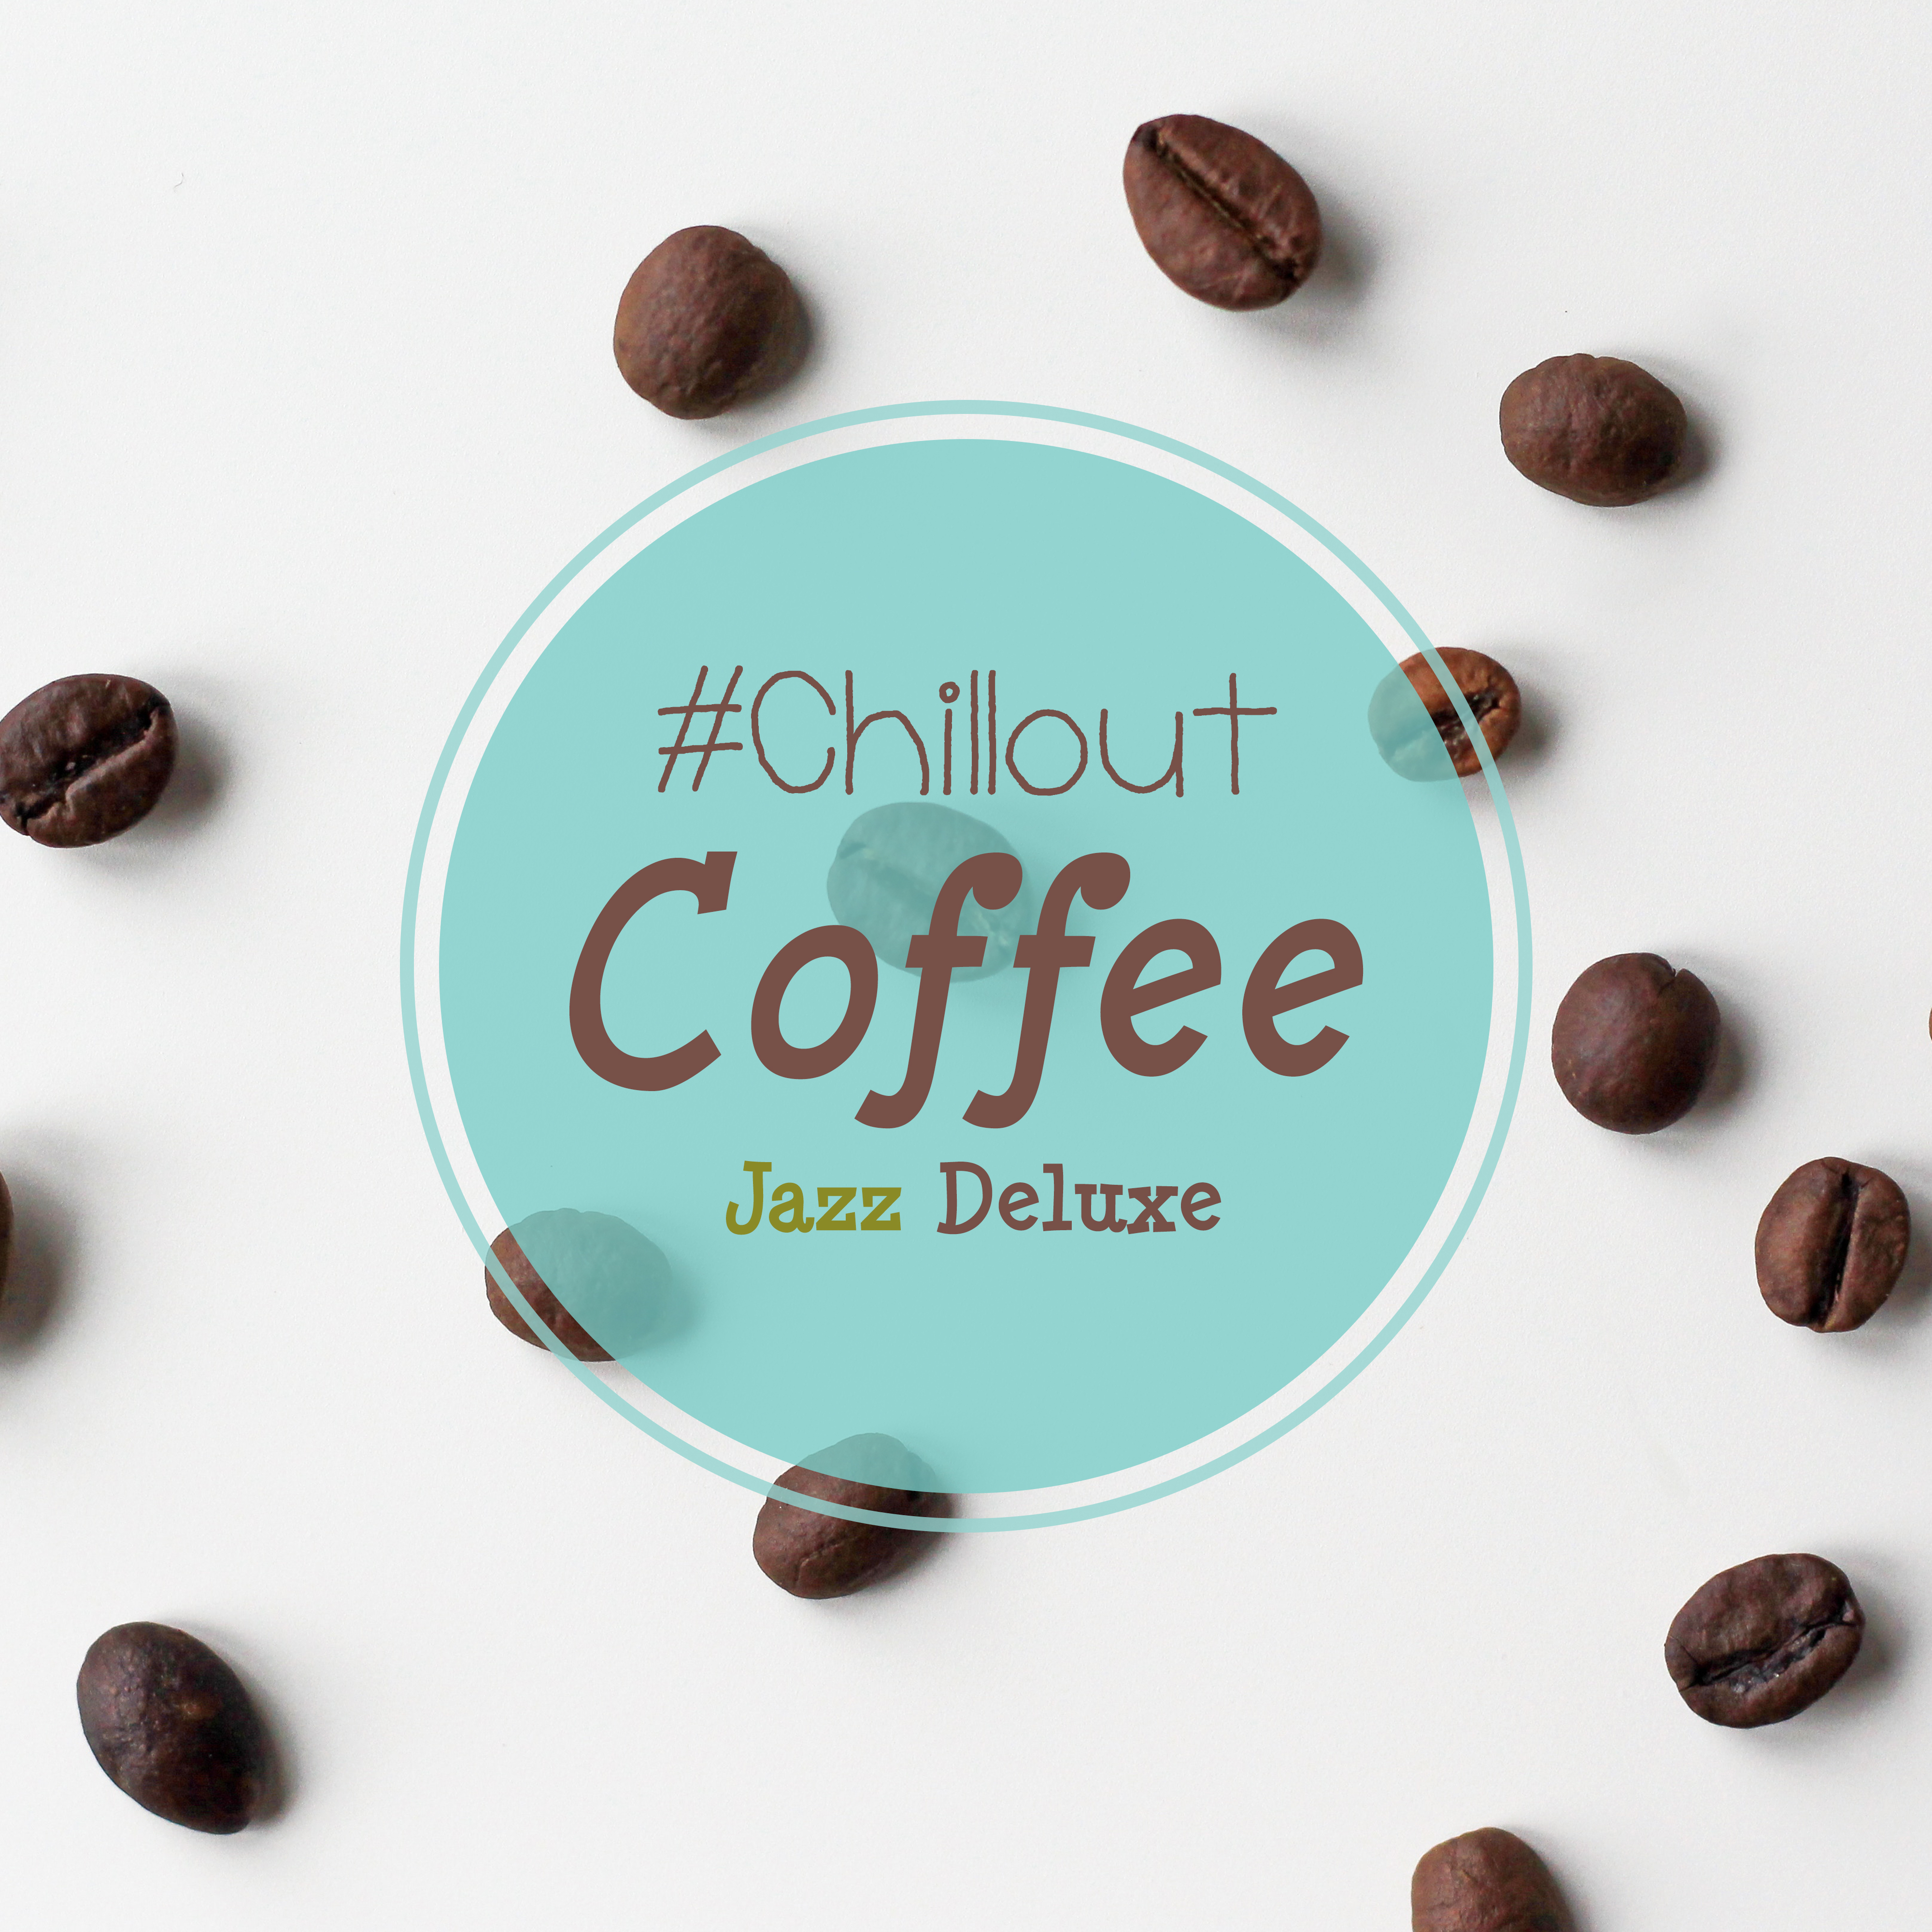 #Chillout Coffee Jazz Deluxe